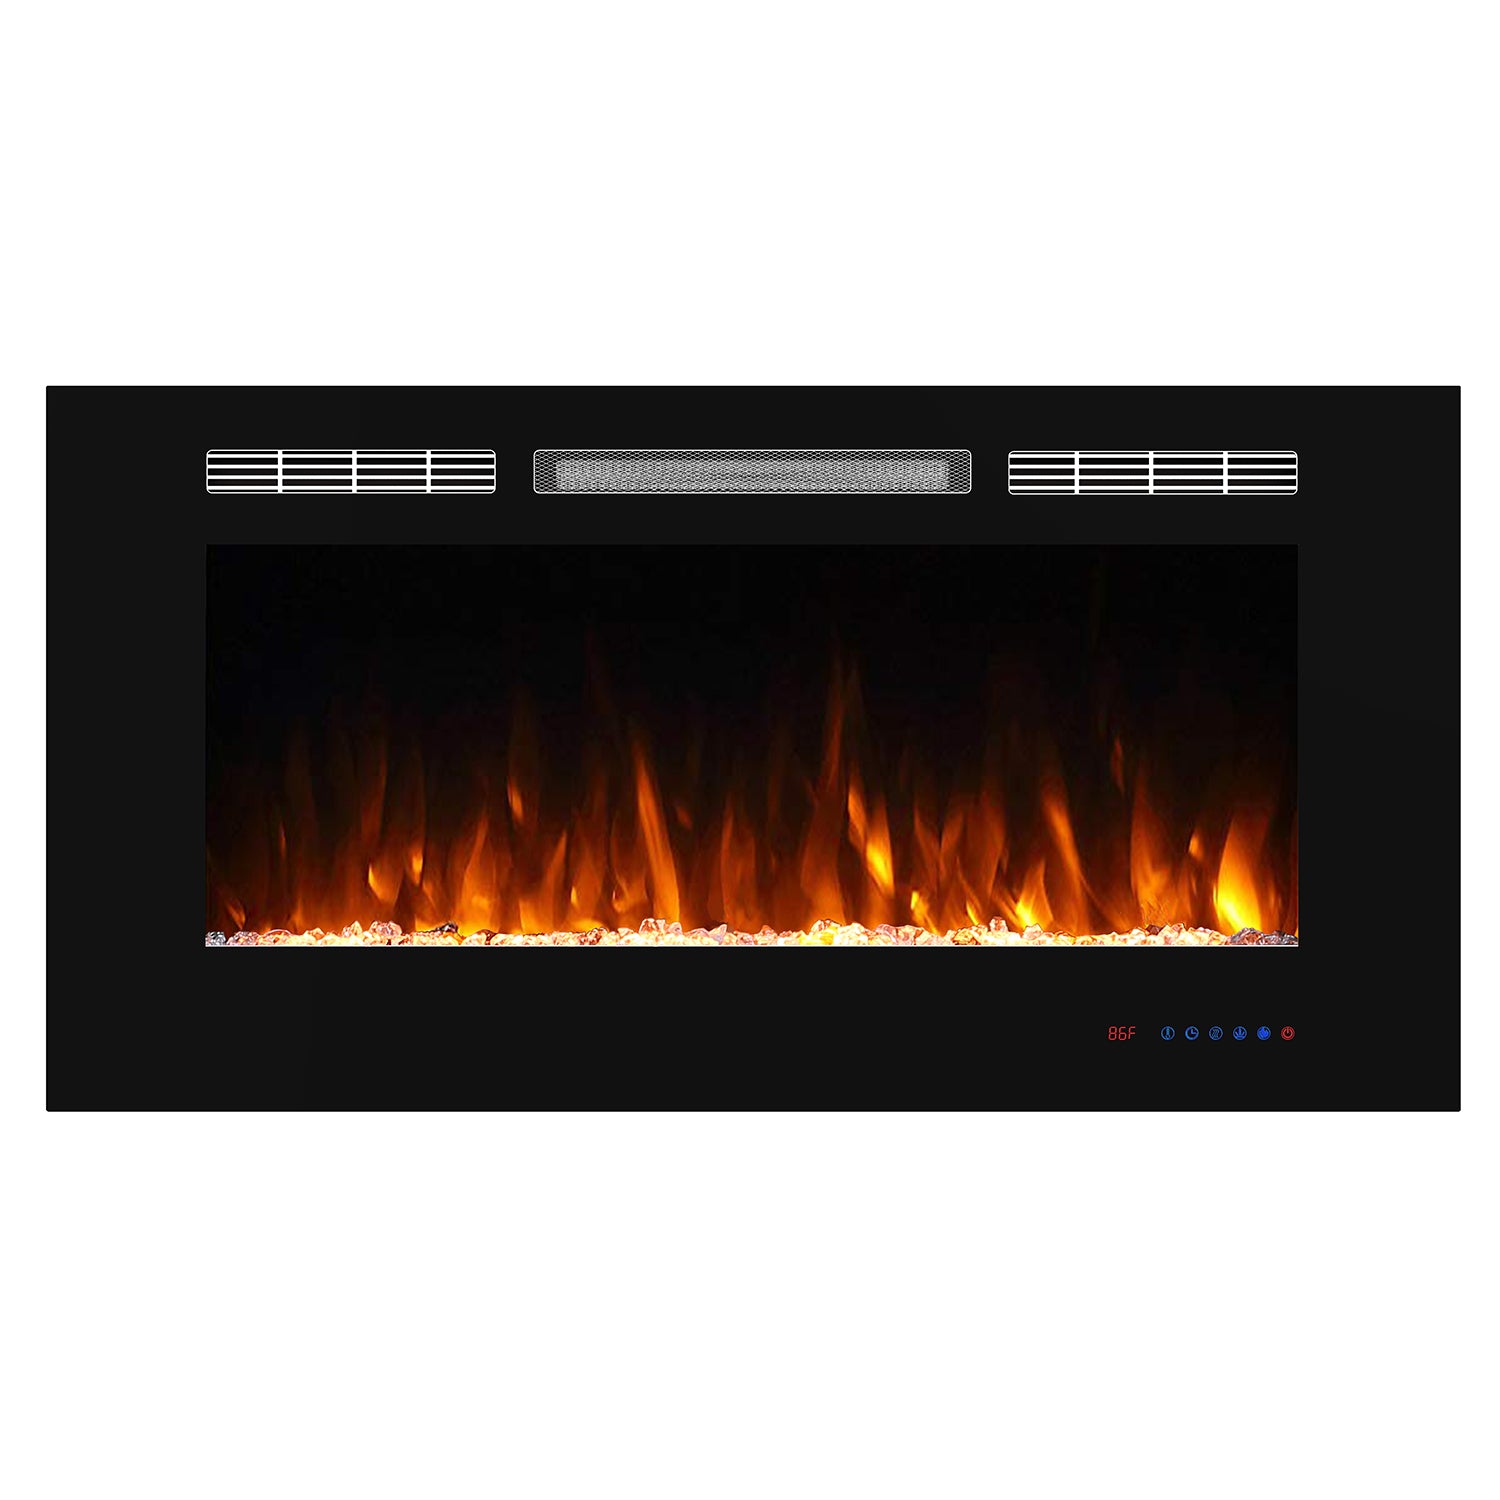 42 in. Electric Fireplace, Recessed Fireplace Insert with Remote Control in Black-Boyel Living